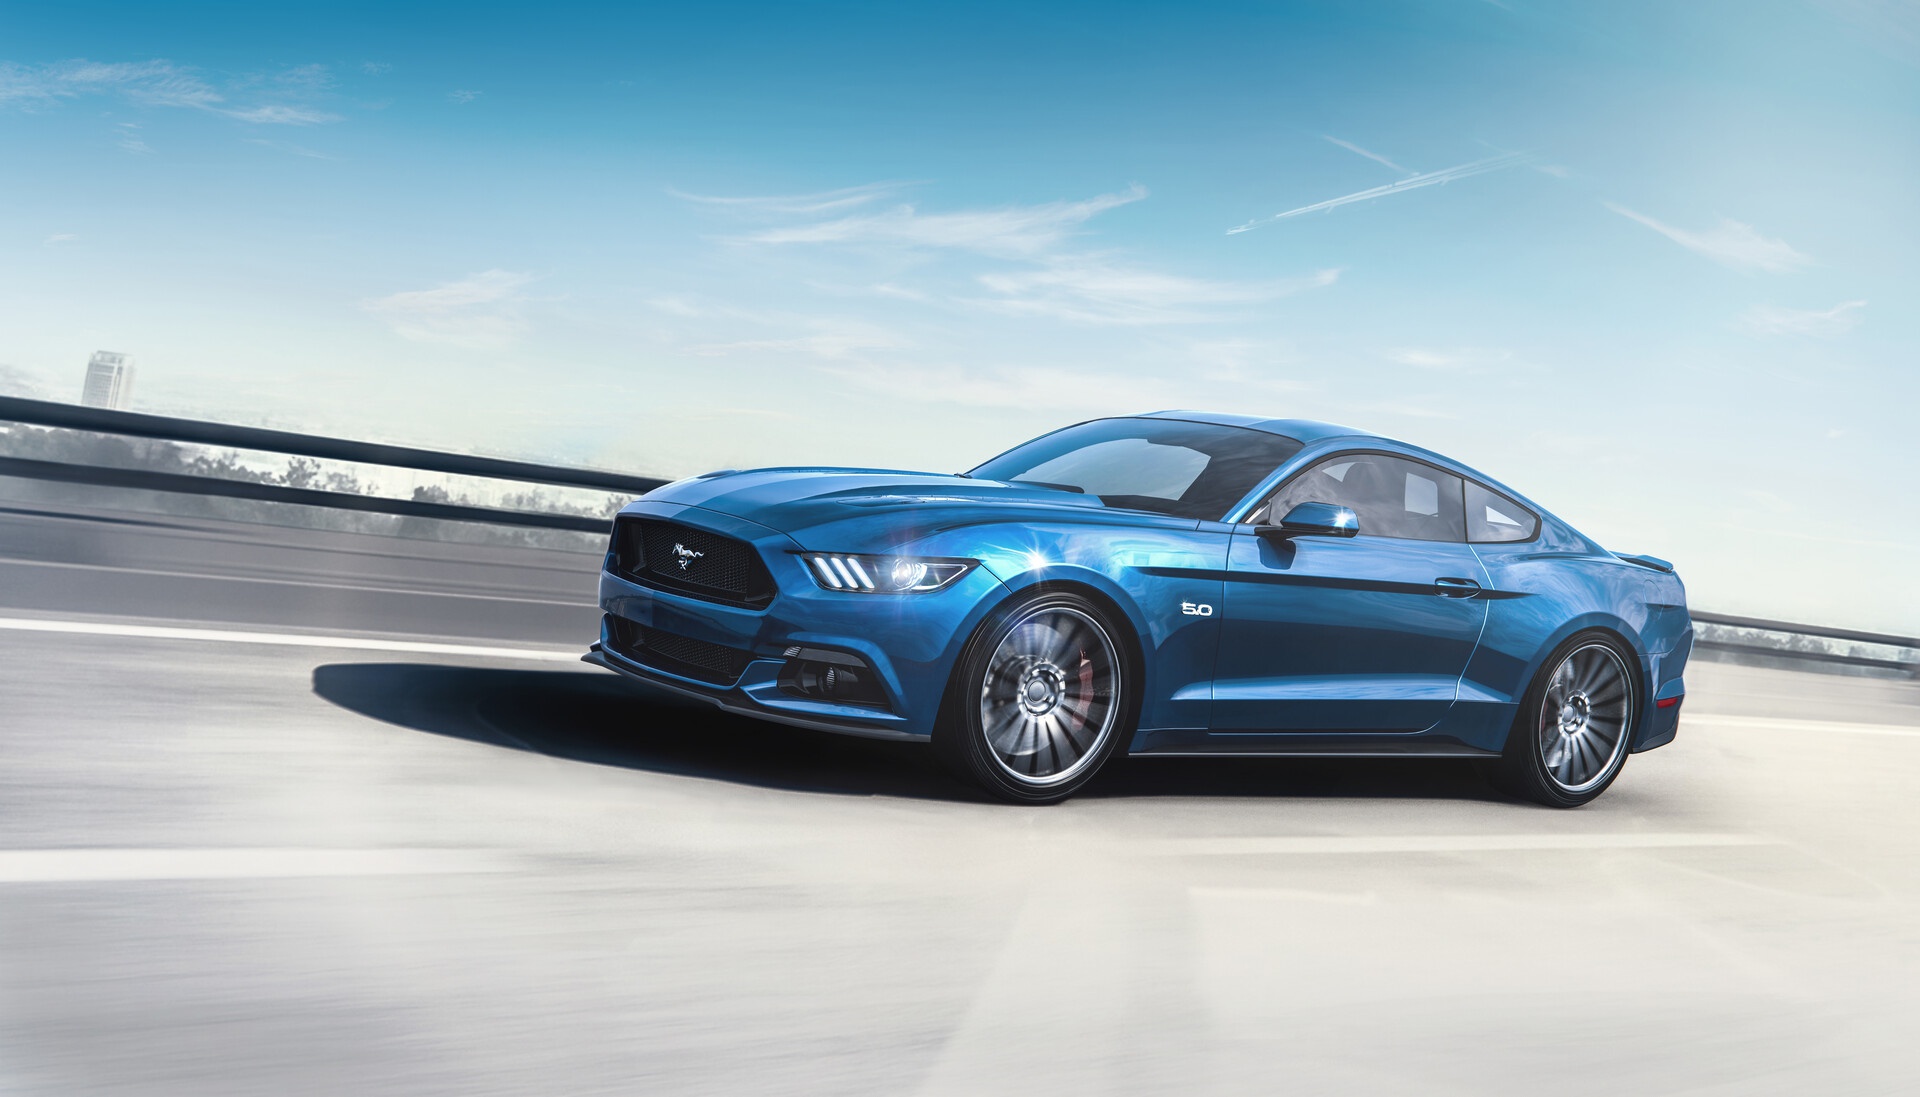 General 1920x1097 Ford Ford Mustang car asphalt vehicle blue cars Ford Mustang S550 muscle cars American cars